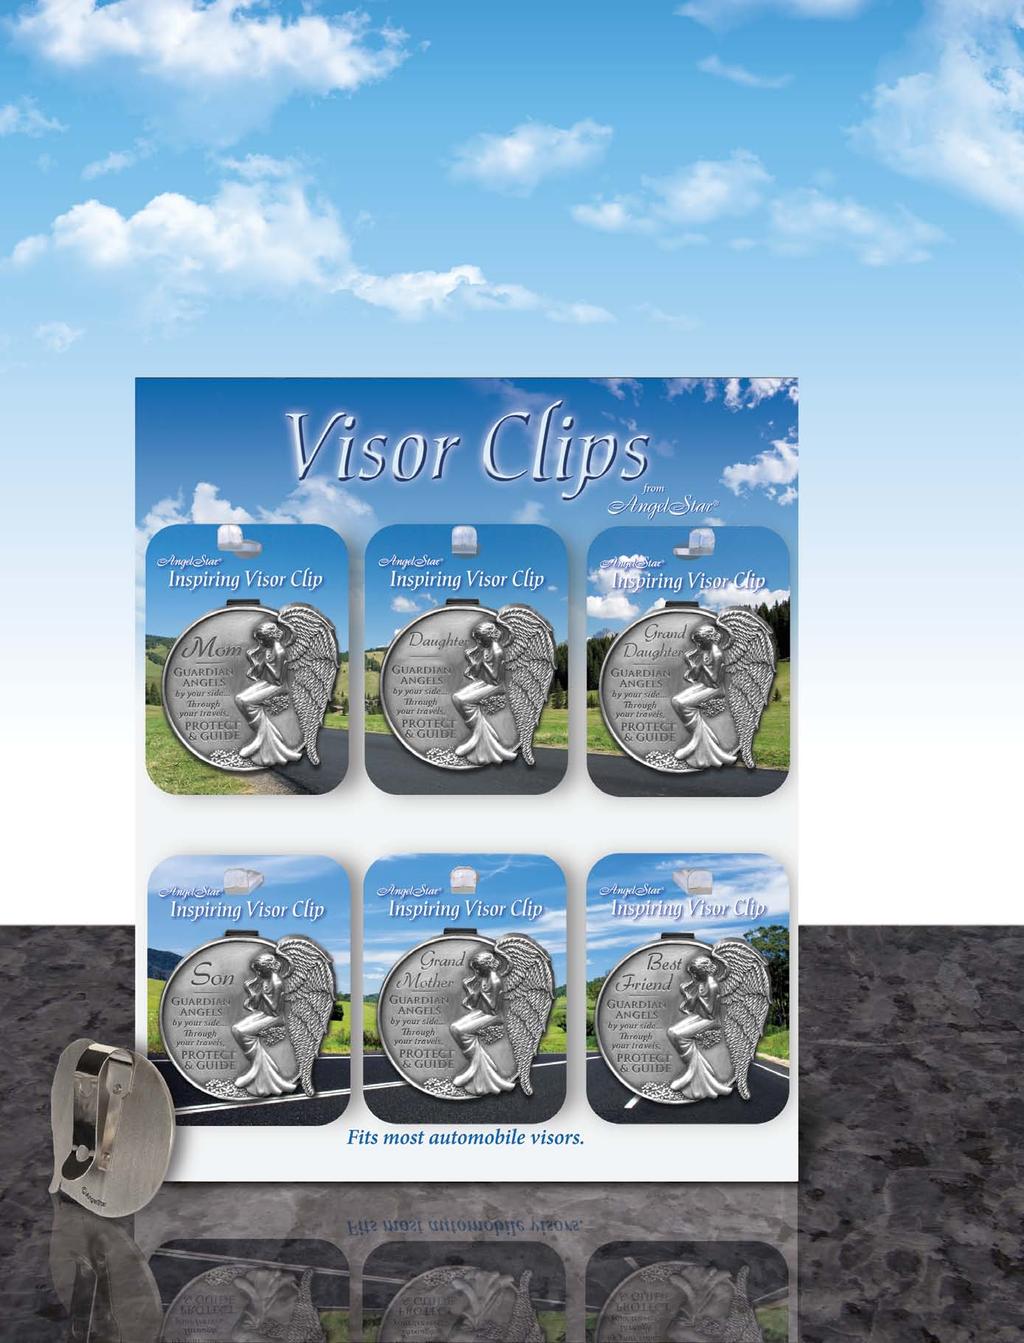 9 Glassware little things Figurines Aunt Birdie Inspirational Gifts Family Visor clips Highly detailed and angelically inspired, these all new metal Visor Clips are the perfect gift for any driver.